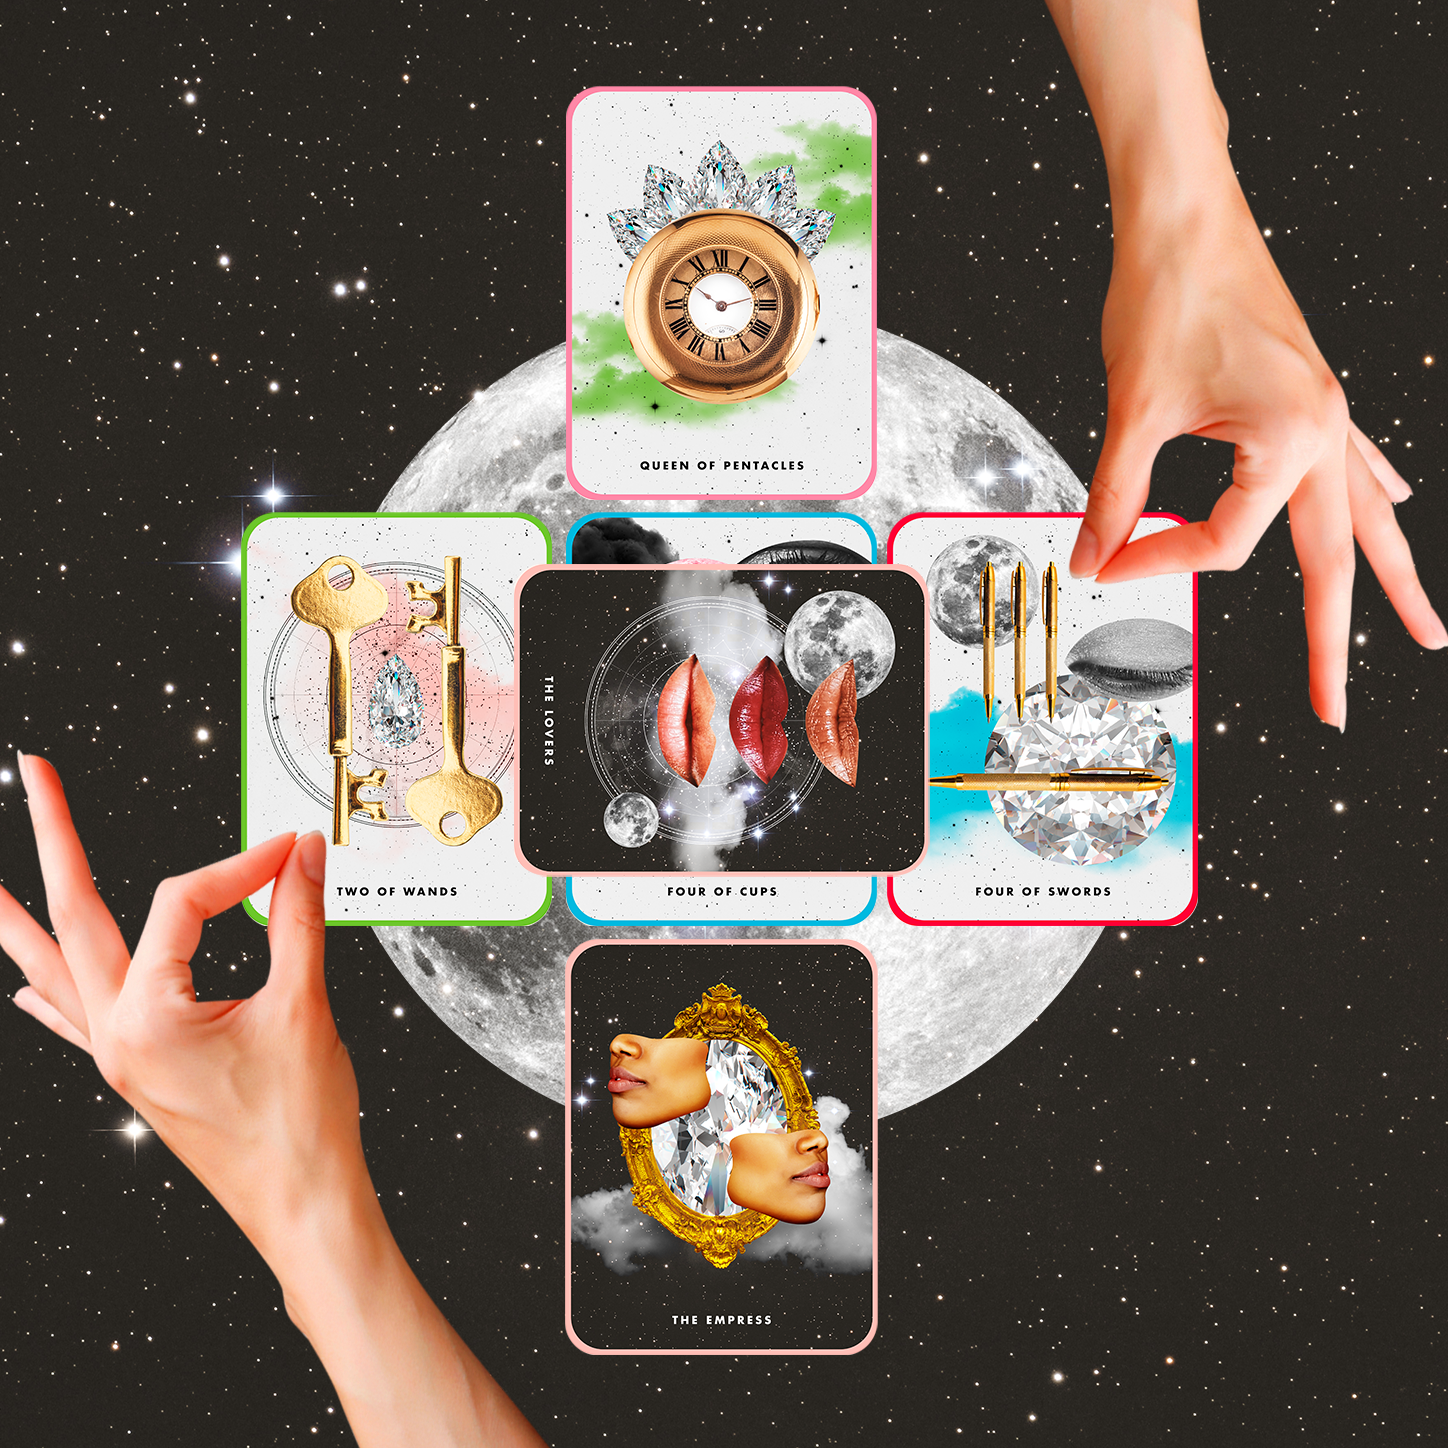 Your Weekly Tarot Card Reading Wants You to Take a Risk